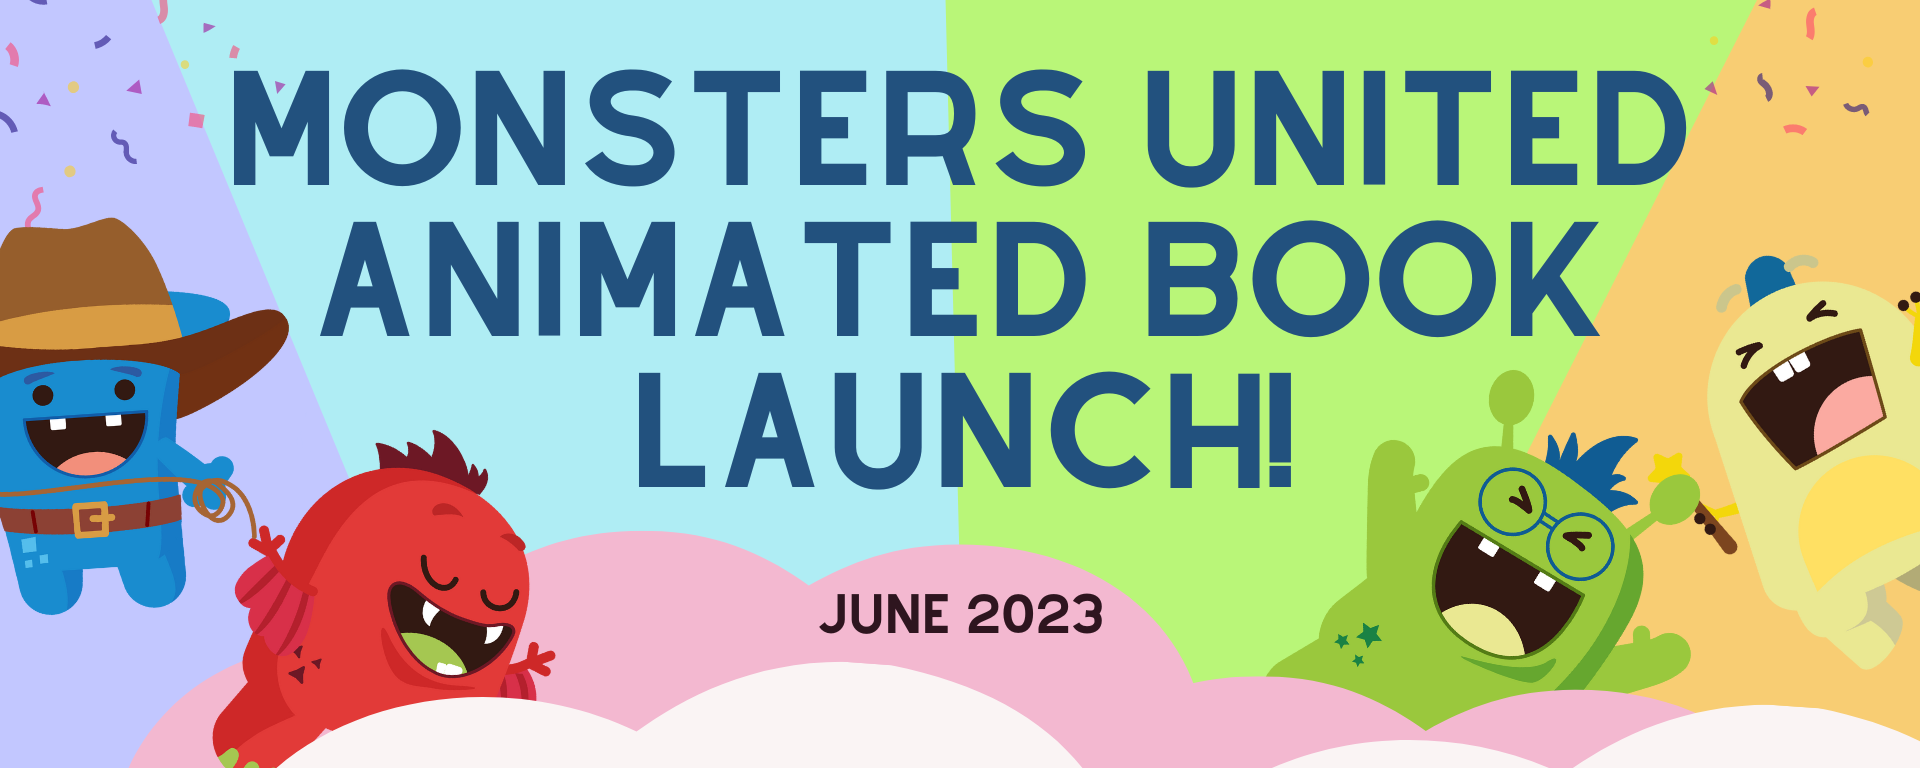 Monsters United Animated Book Launch